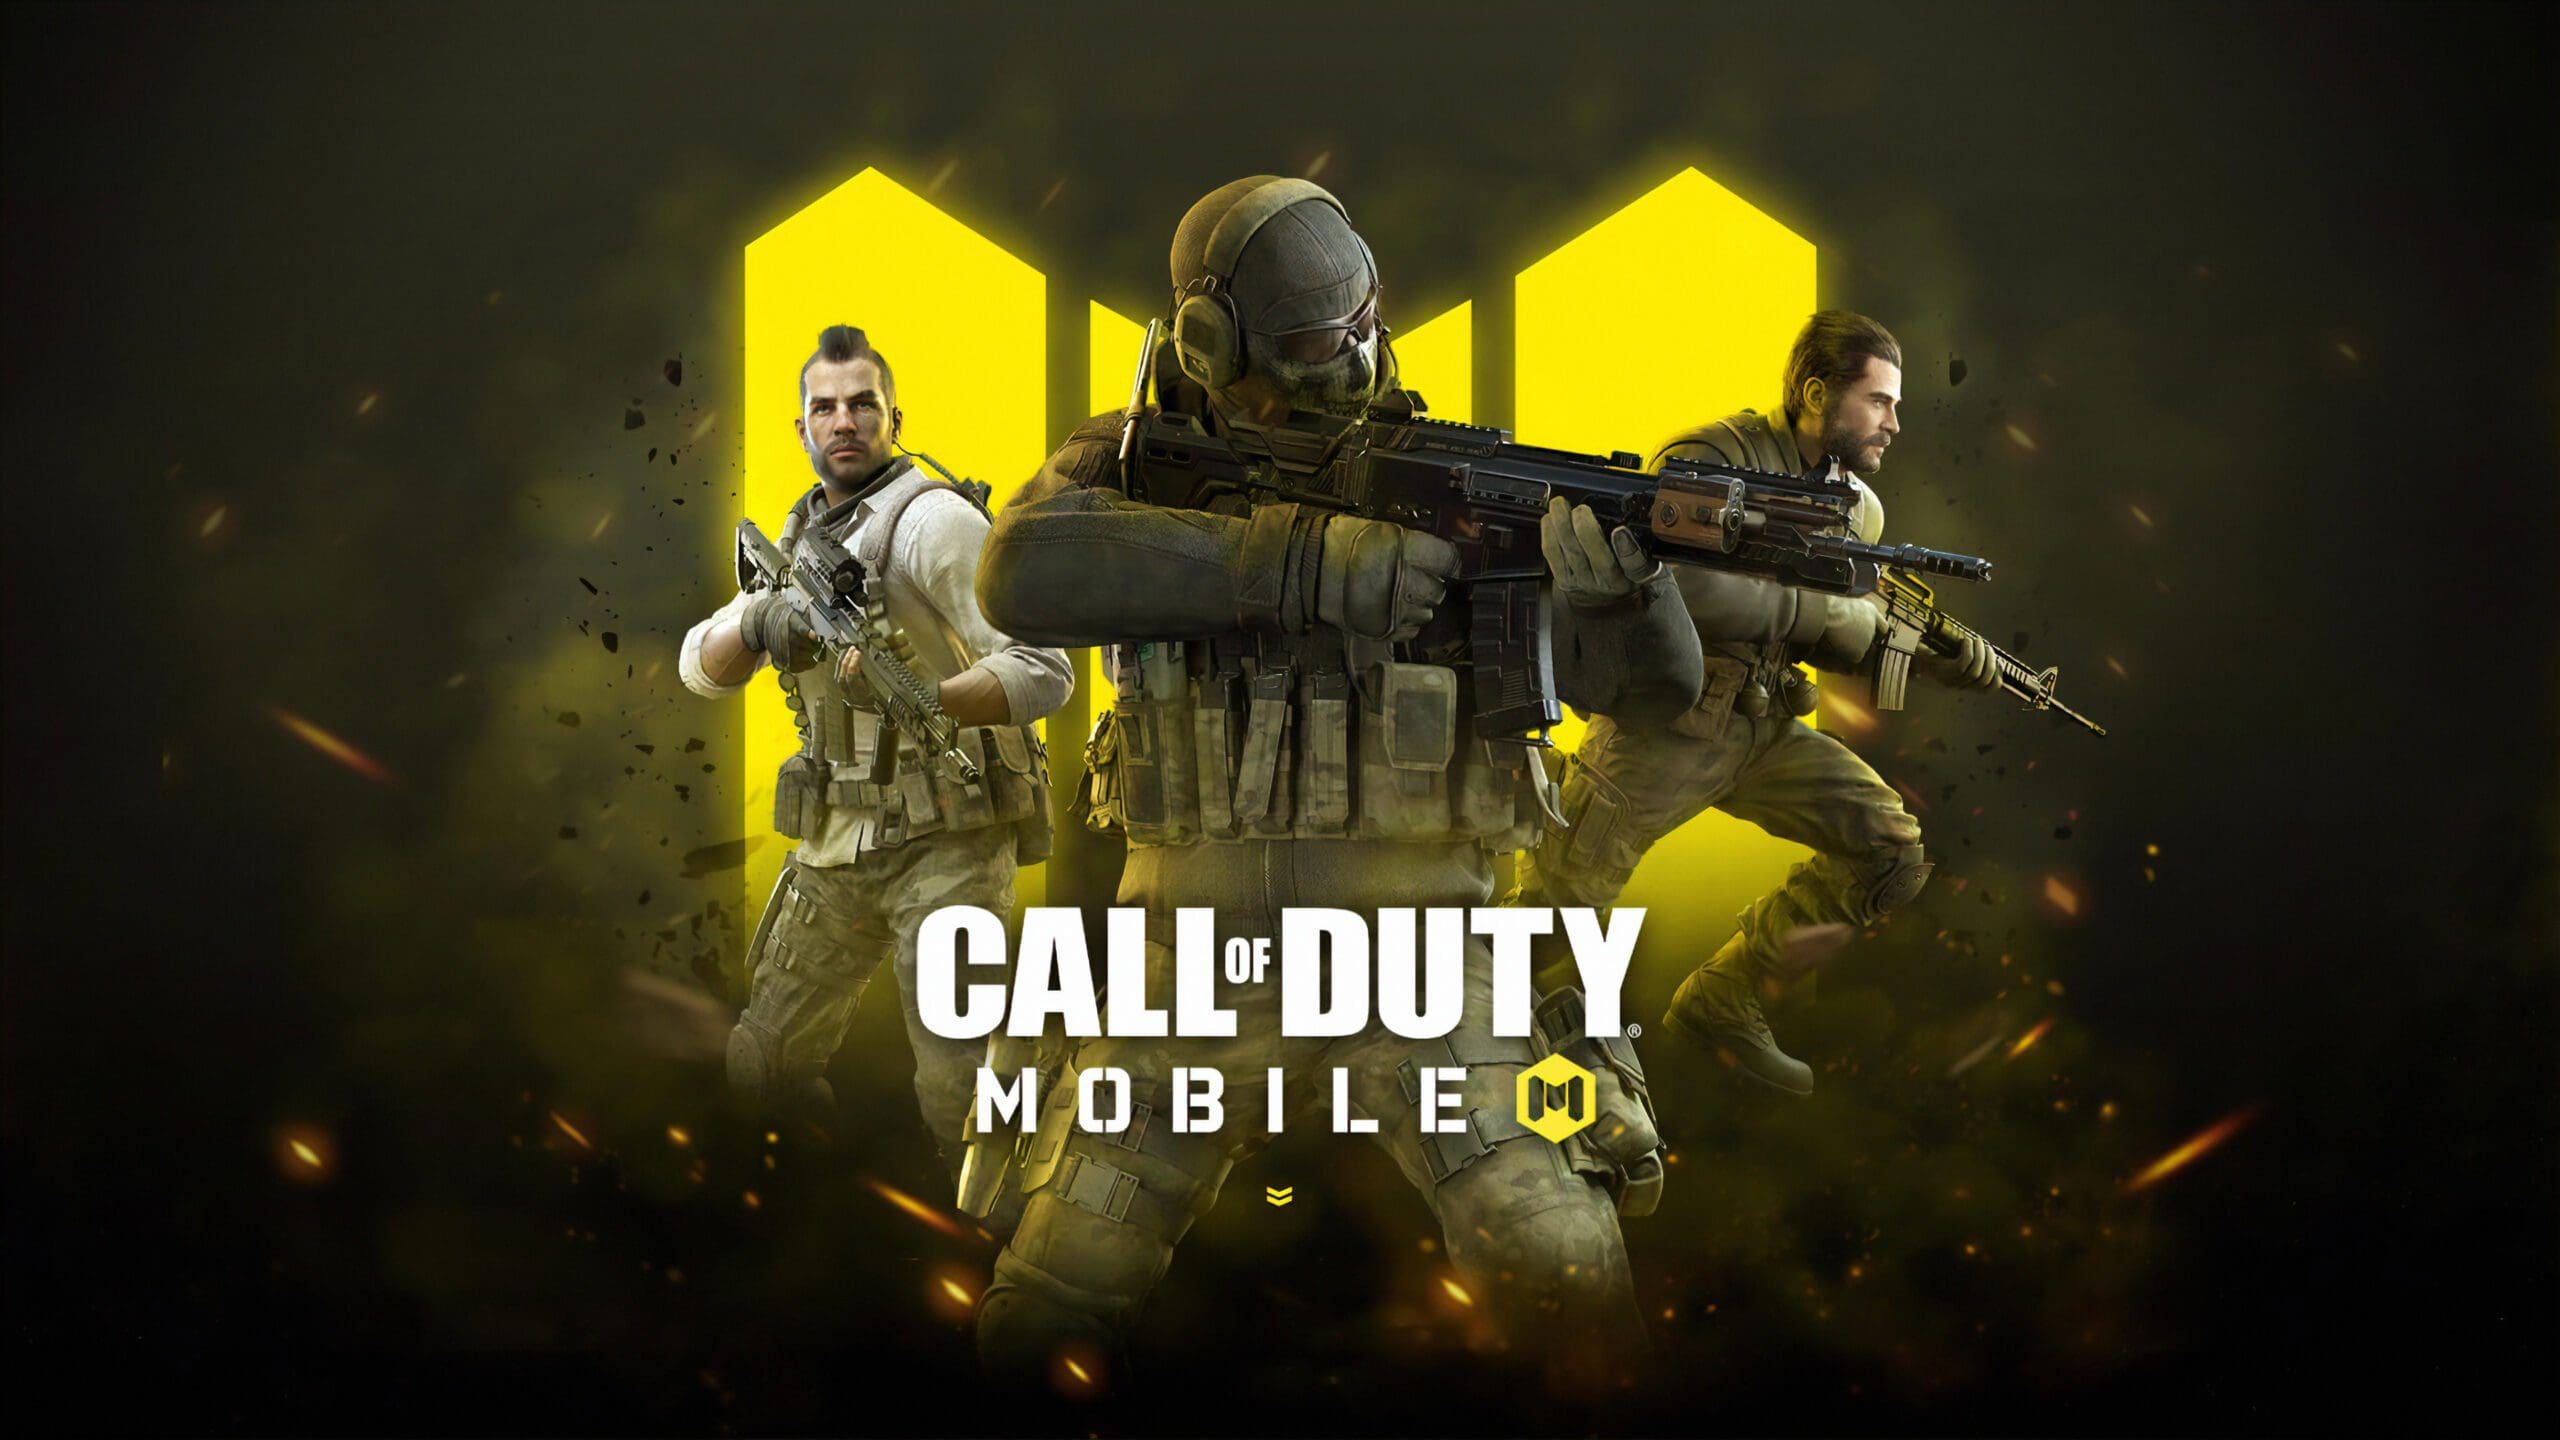 Call Of Duty Mobile Kill 5 Enemies with any LMG Task Complete: